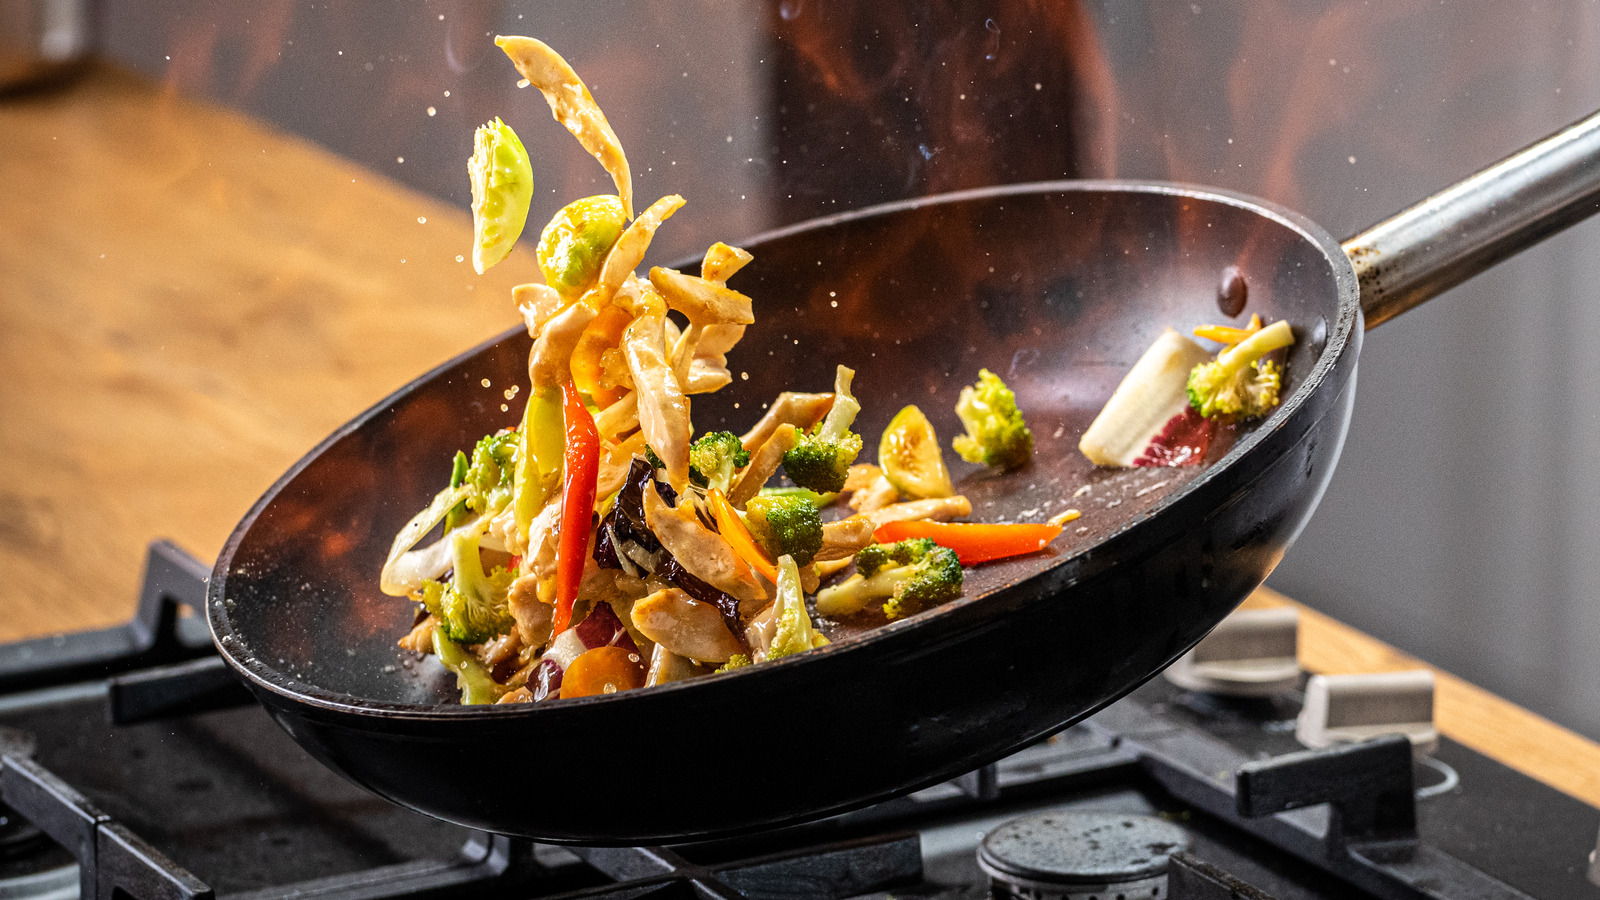 https://www.thedailymeal.com/img/gallery/the-reason-you-should-steer-clear-of-cooking-acidic-dishes-in-a-wok/l-intro-1690217241.jpg